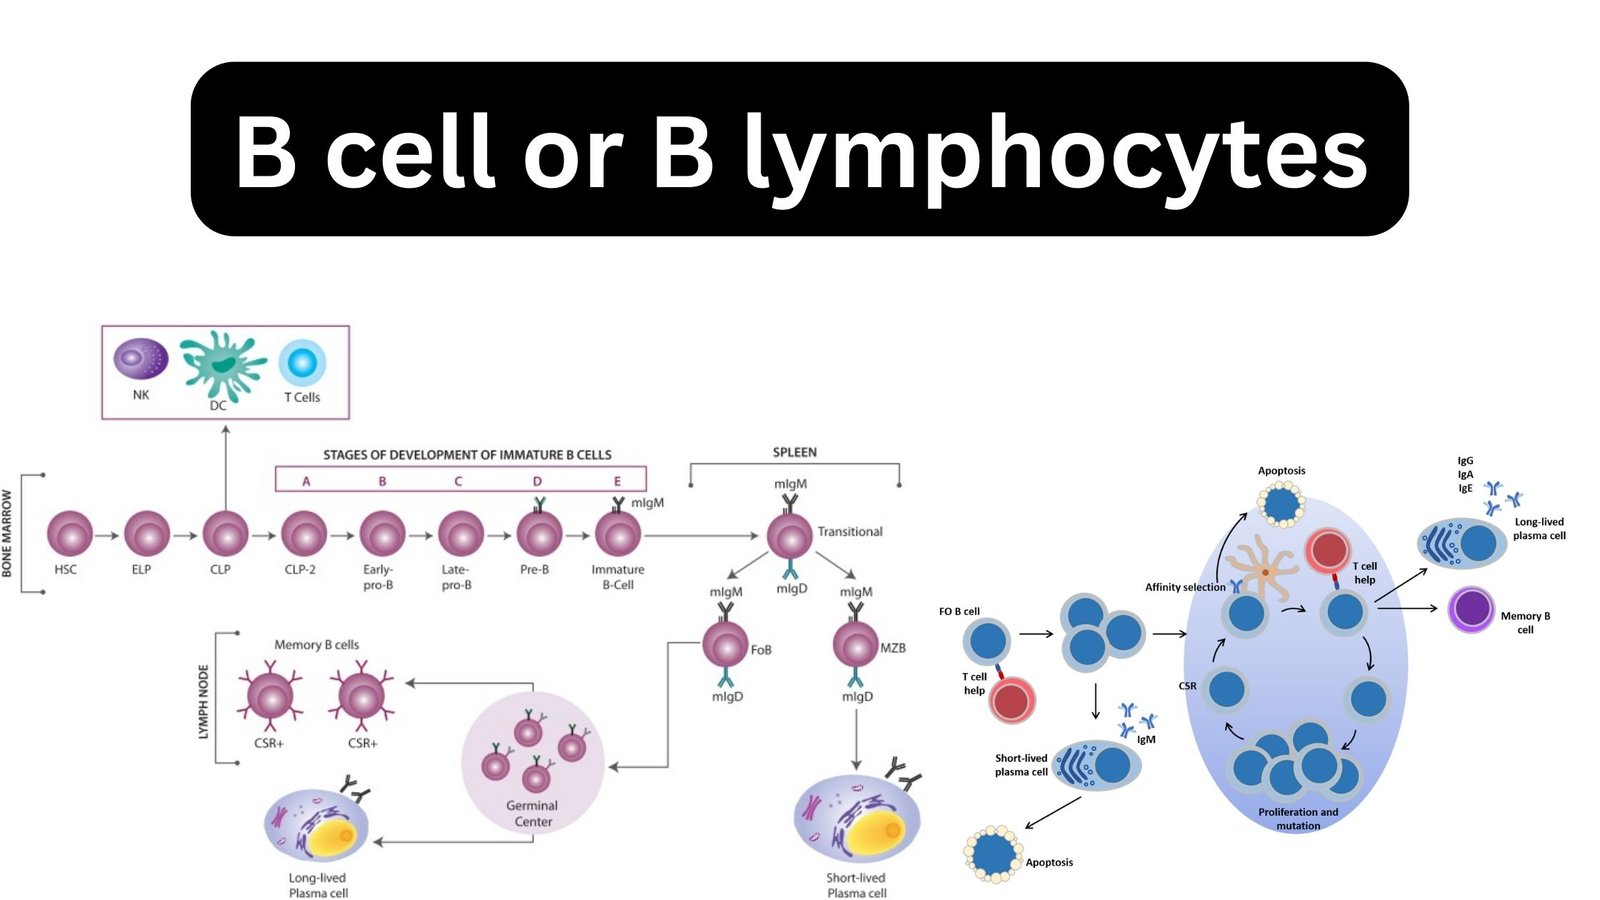 B cell or B lymphocytes - Definition, Function, Types